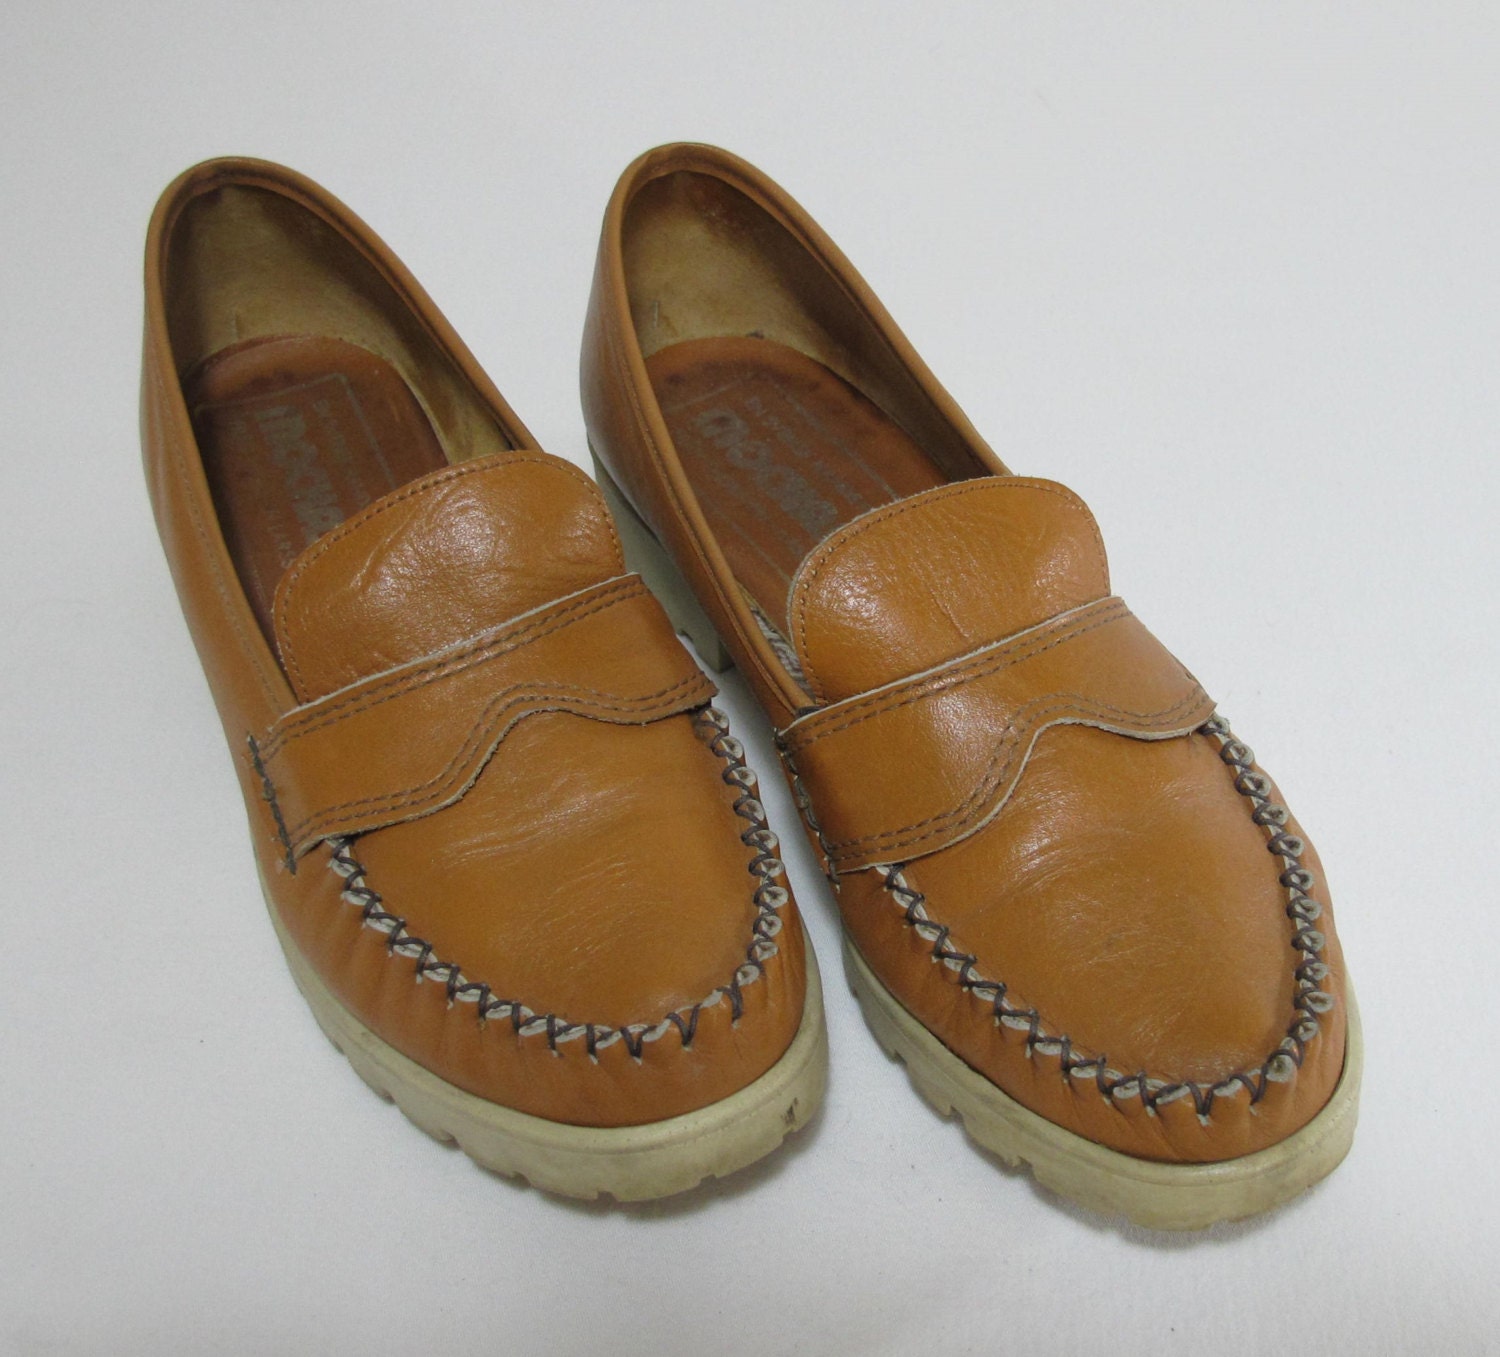 Vintage Women’s Loafers Handmade Moccasins Comfortable Shoes 1970s ...